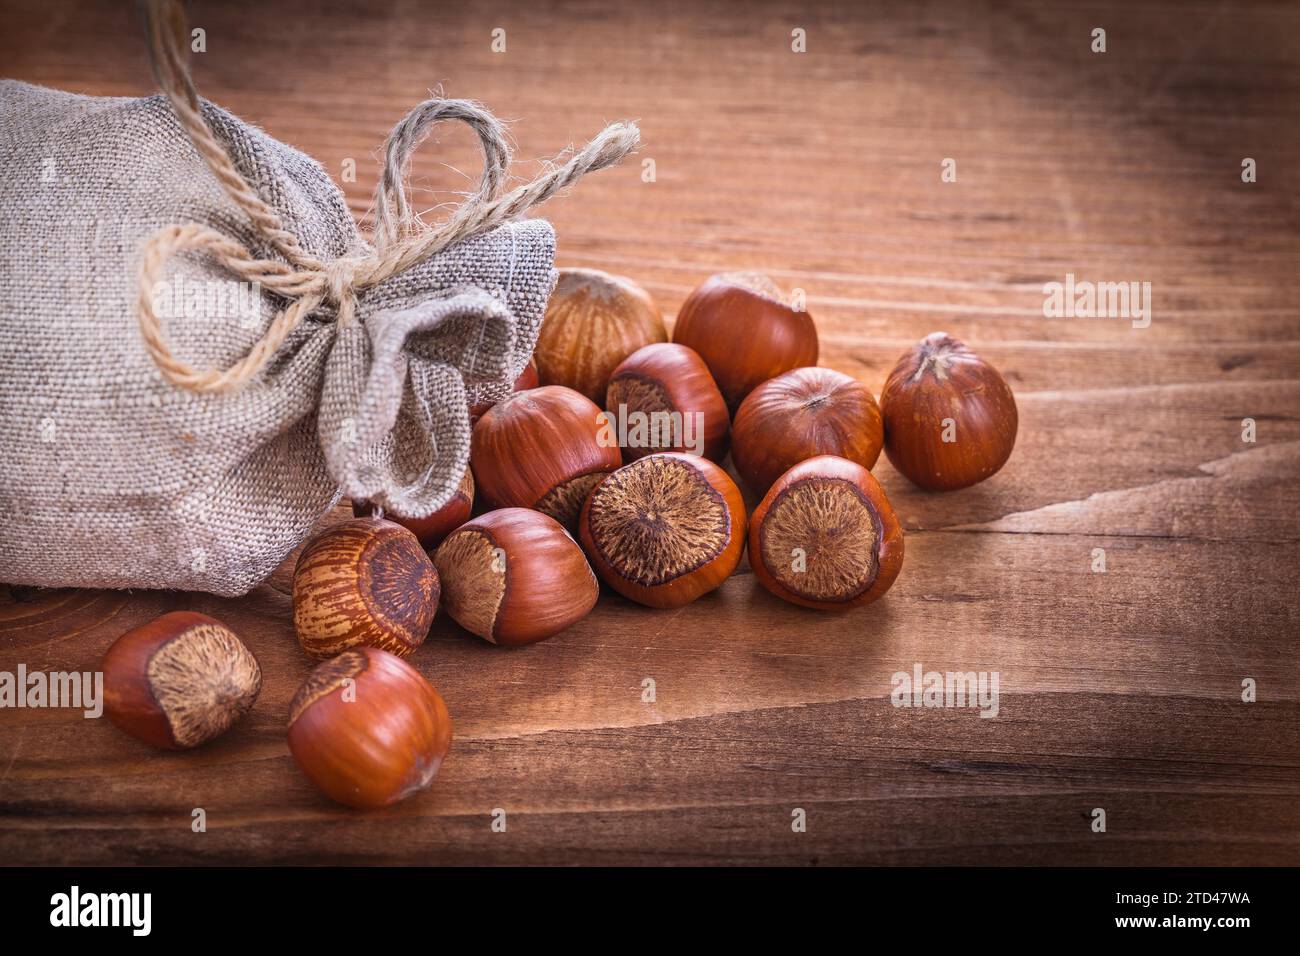 Hazelnuts and sack on vintage wooden board Food and drink concept Stock Photo